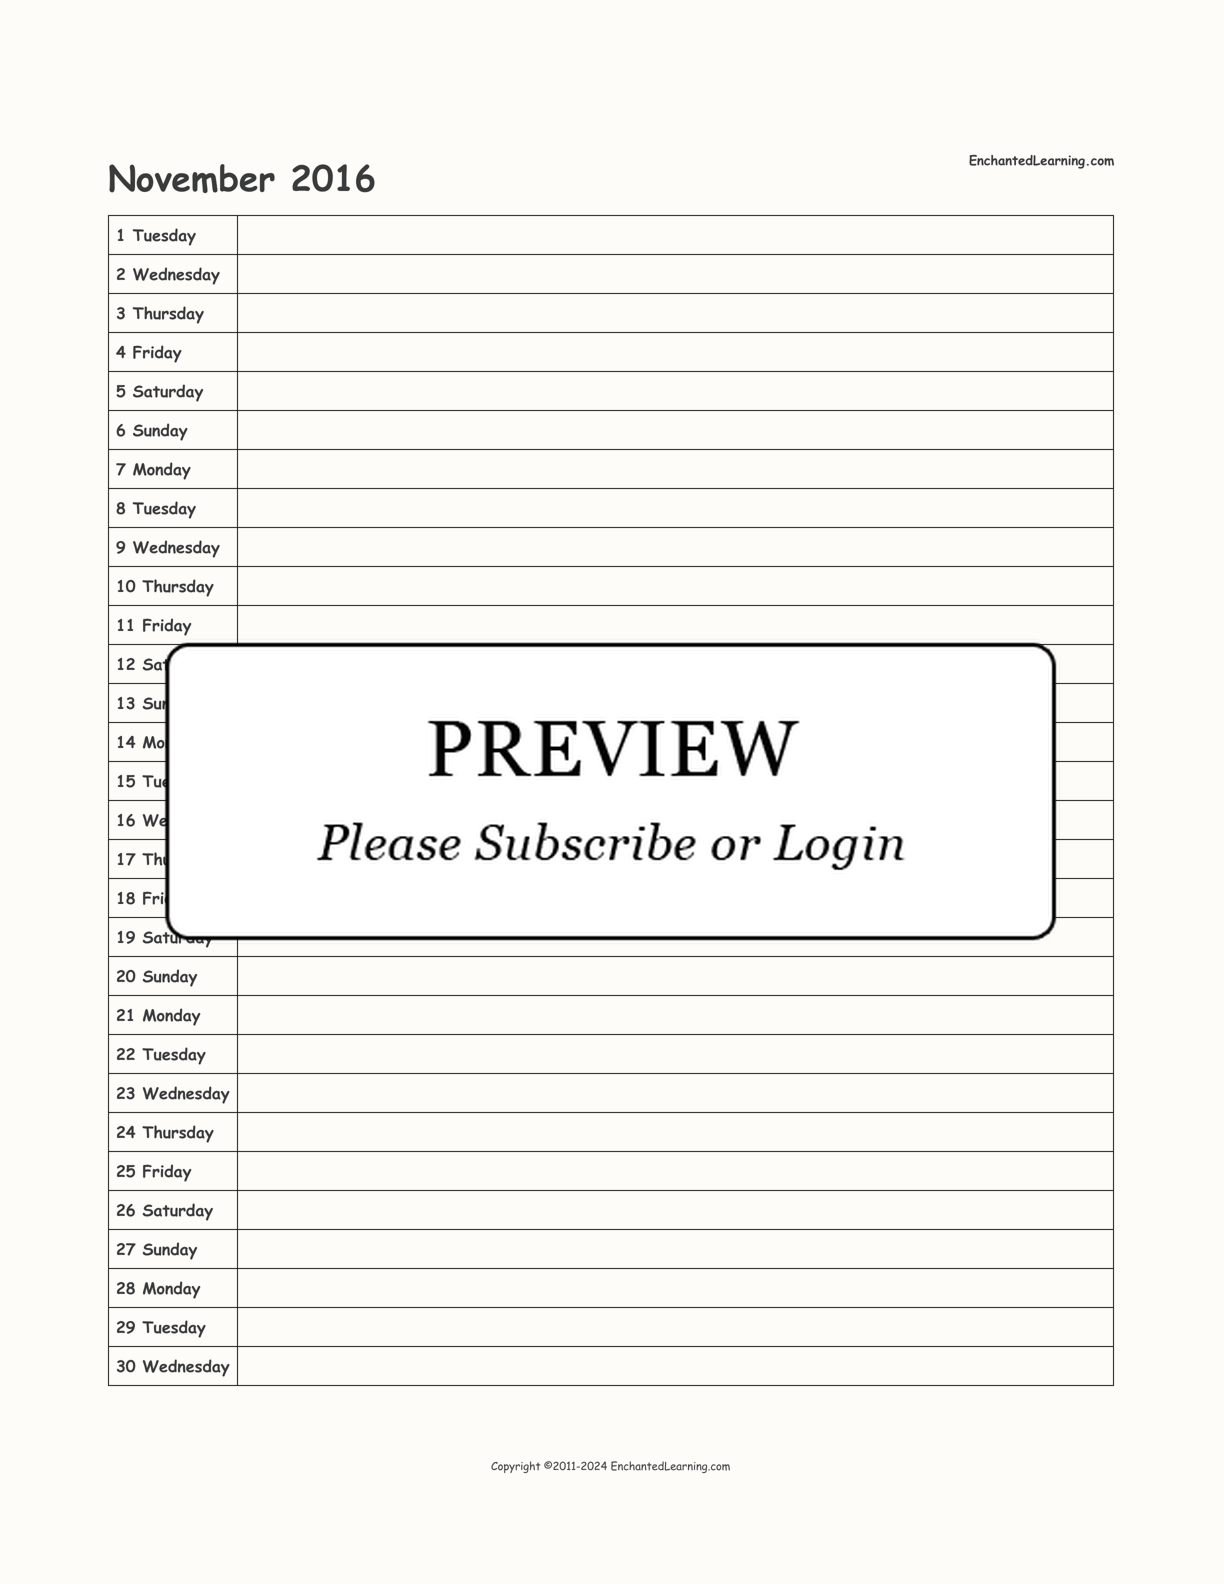 2016 Scheduling Calendar interactive printout page 11